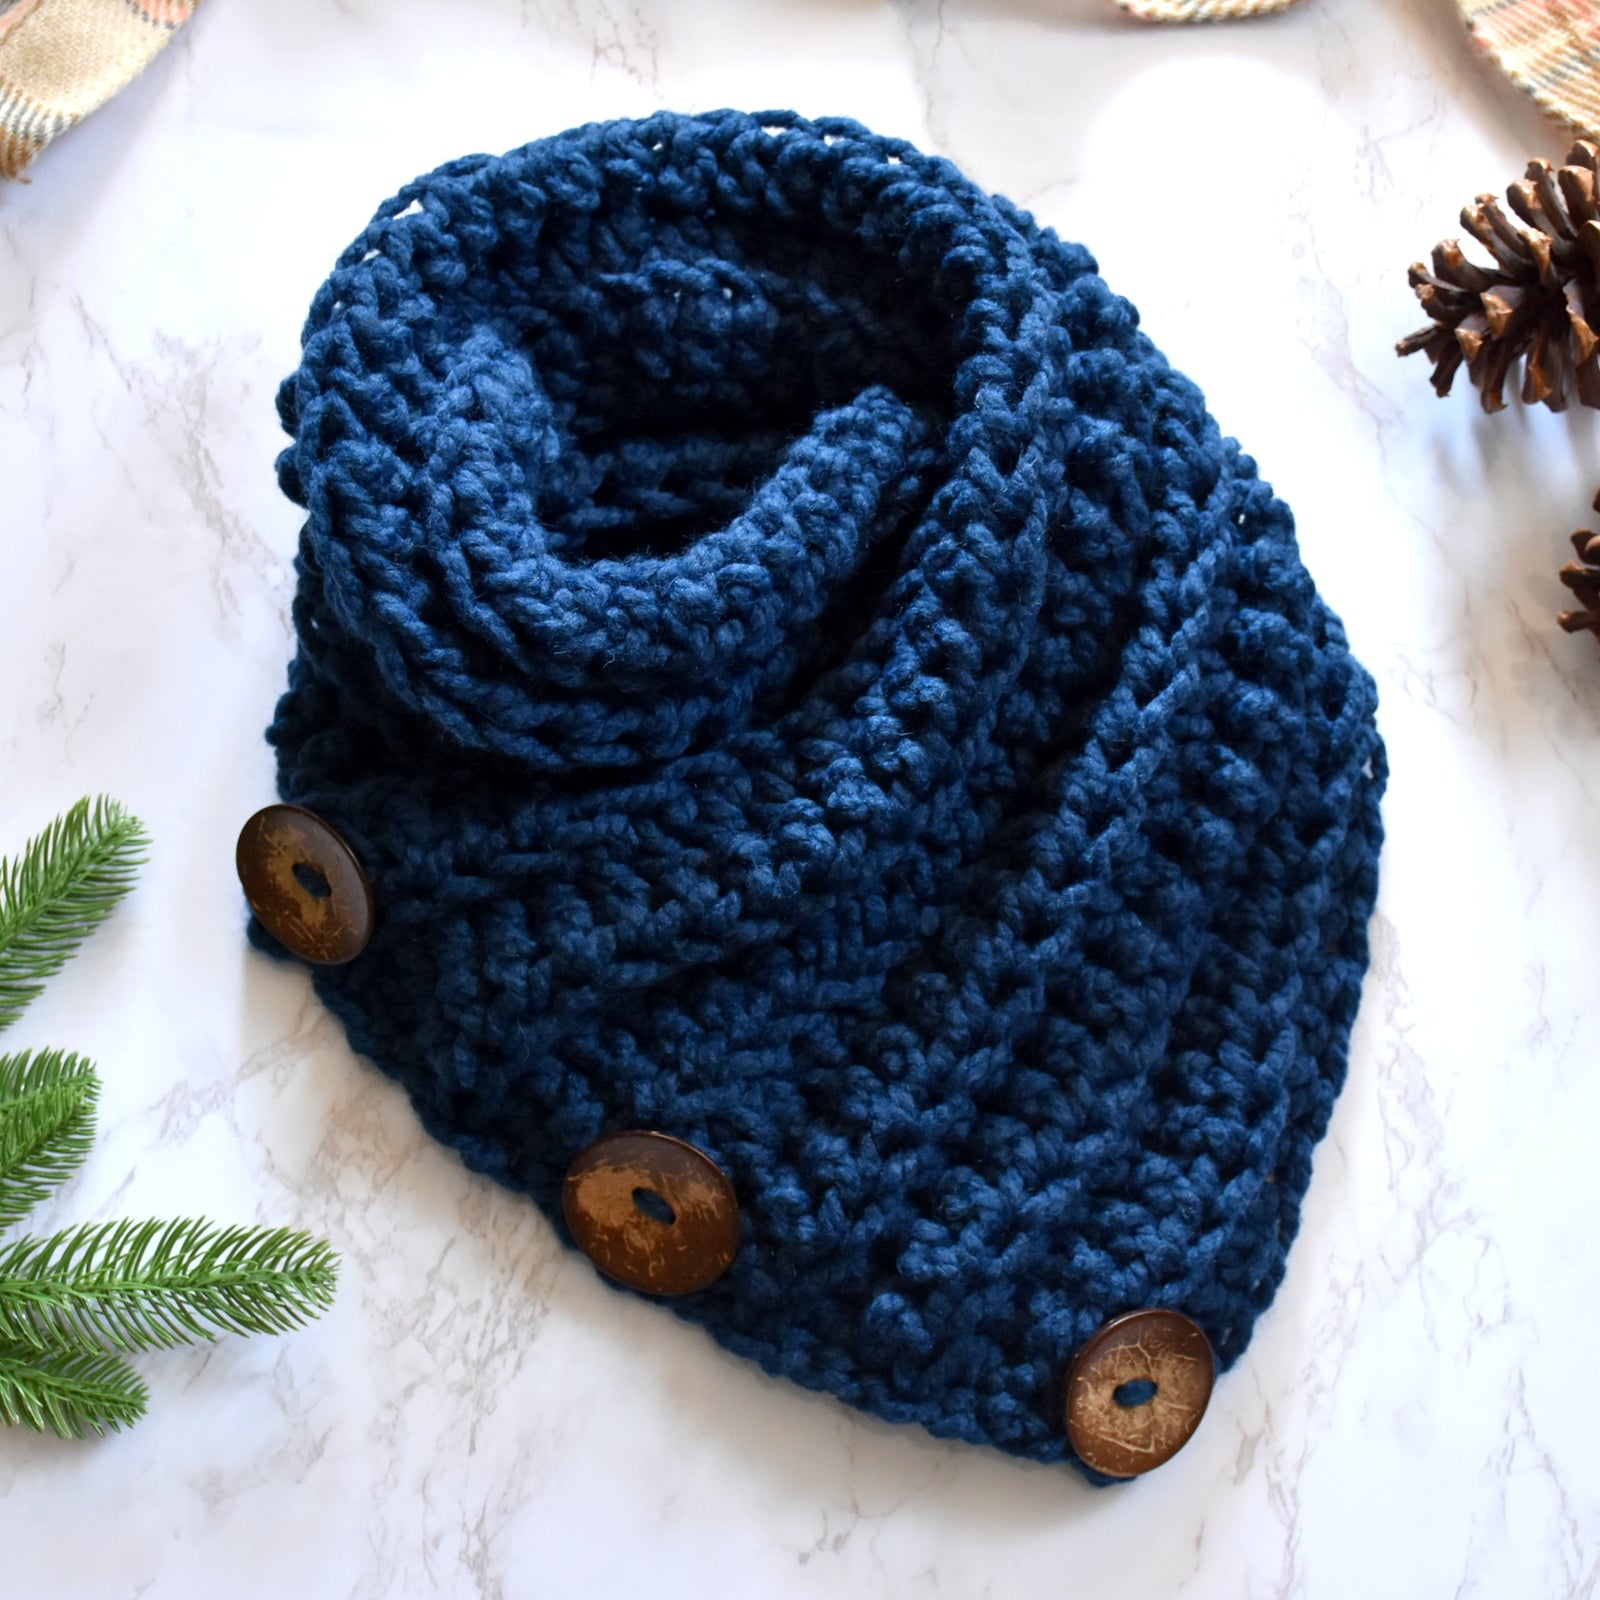 Crochet Scarf Neck Warmer with Buttons